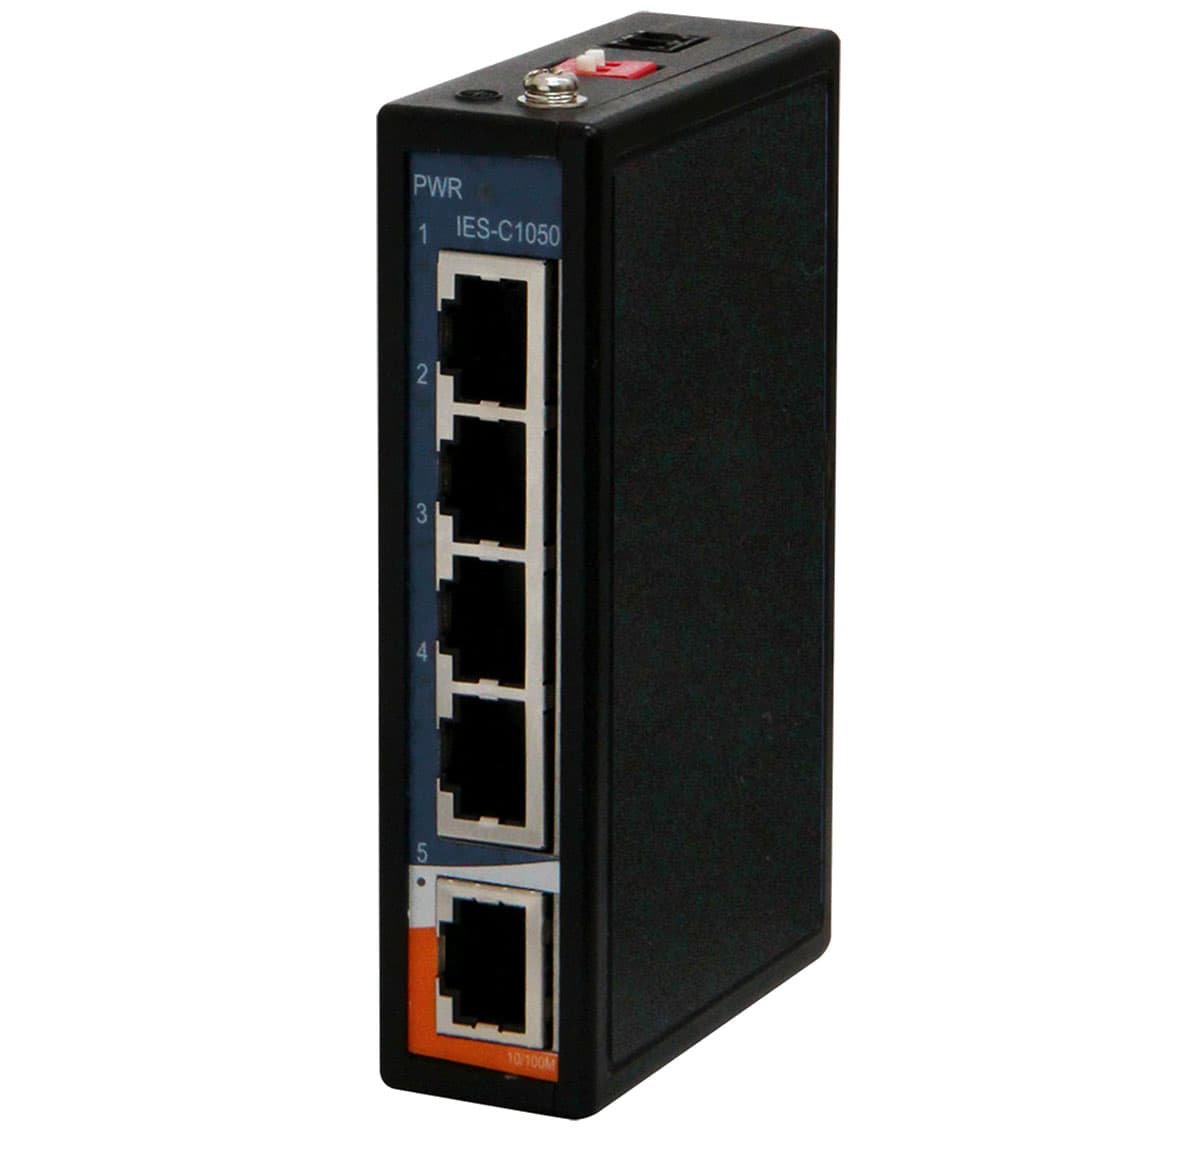 5-port unmanaged Fast Ethernet switch for industrial use